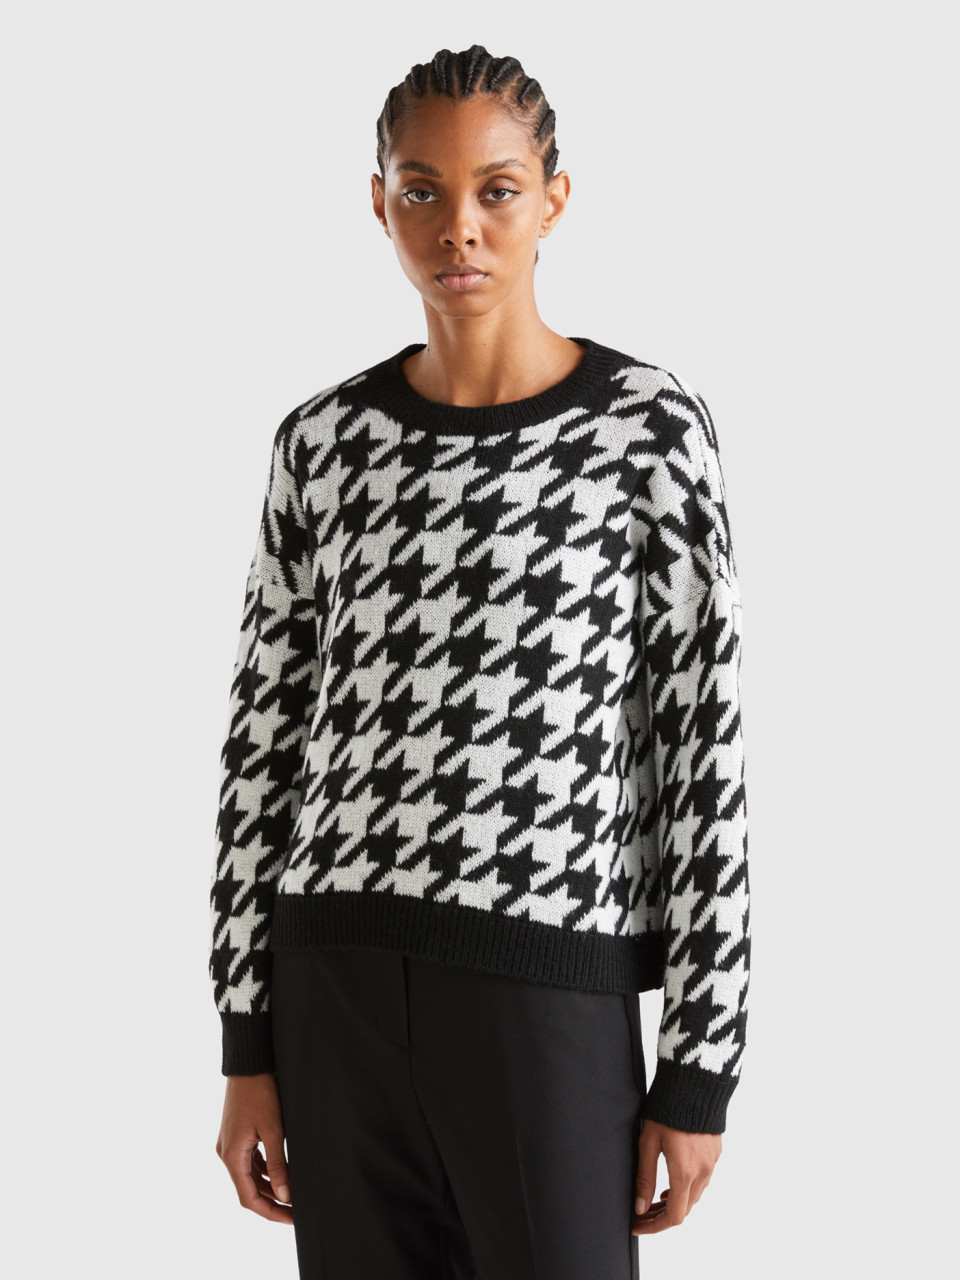 Benetton, Houndstooth Sweater, Multi-color, Women